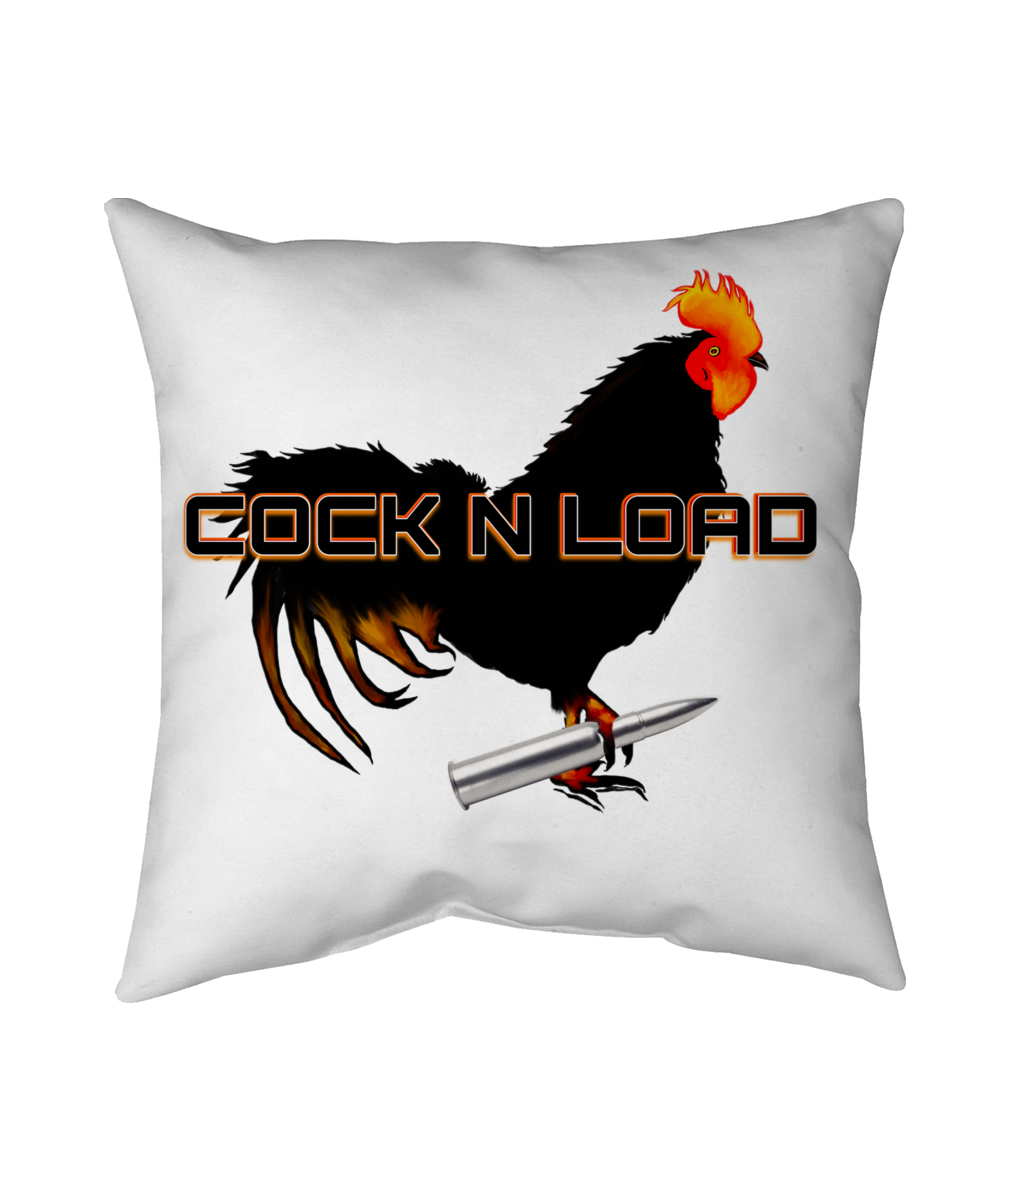 Cock n load 2 Throw Pillow - Two-Sided Spun Polyester (Insert included) - Assorted Sizes (14x14, 16x16, 18x18, 20x20, 26x26)